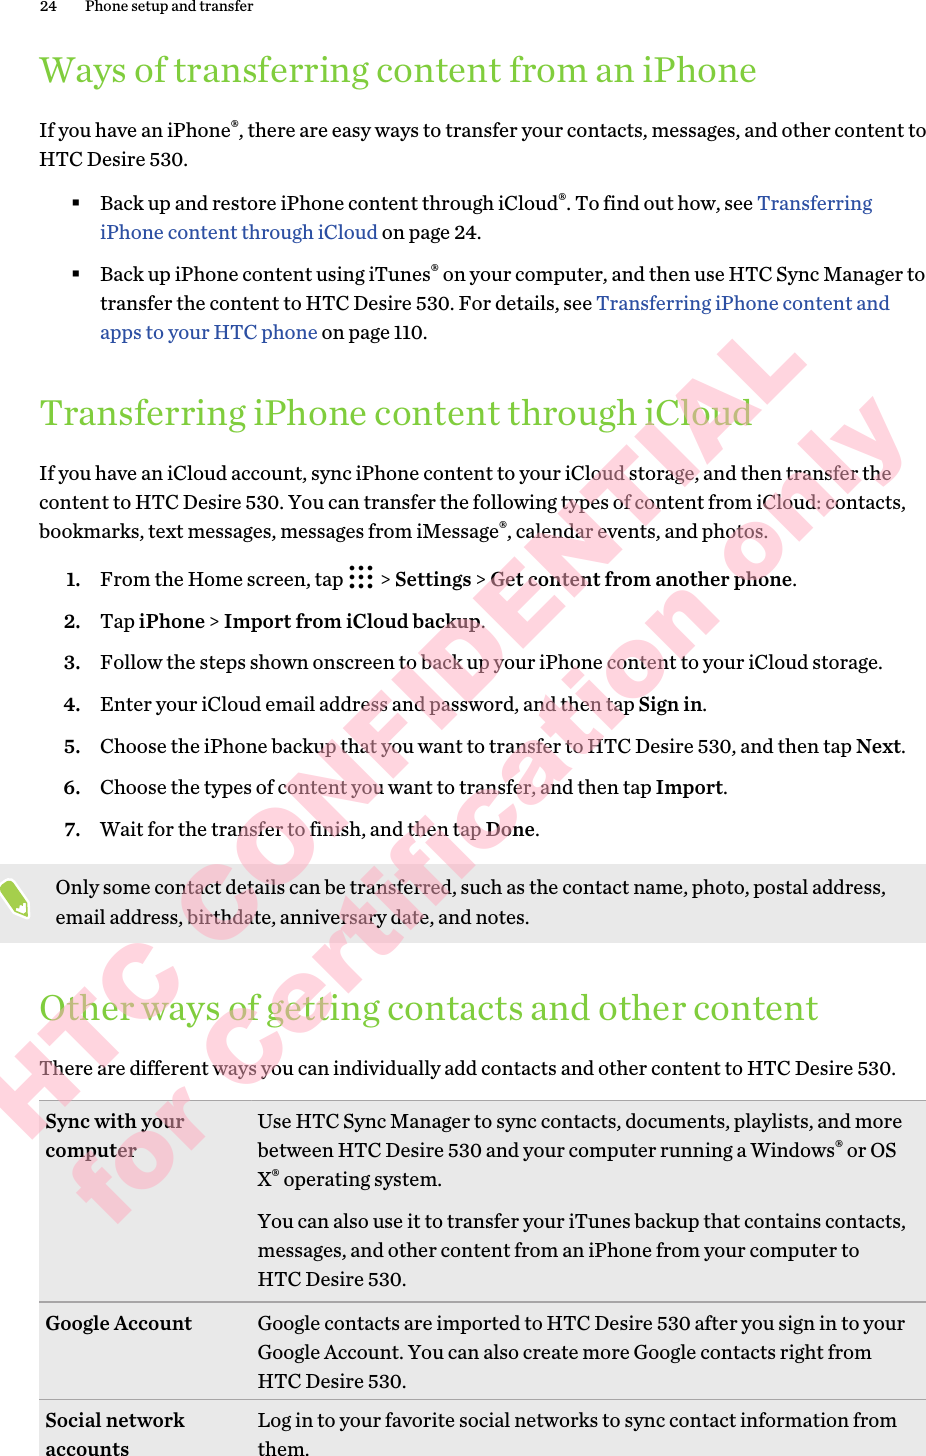 Ways of transferring content from an iPhoneIf you have an iPhone®, there are easy ways to transfer your contacts, messages, and other content to HTC Desire 530. §Back up and restore iPhone content through iCloud®. To find out how, see Transferring iPhone content through iCloud on page 24.§Back up iPhone content using iTunes® on your computer, and then use HTC Sync Manager to transfer the content to HTC Desire 530. For details, see Transferring iPhone content and apps to your HTC phone on page 110.Transferring iPhone content through iCloudIf you have an iCloud account, sync iPhone content to your iCloud storage, and then transfer the content to HTC Desire 530. You can transfer the following types of content from iCloud: contacts, bookmarks, text messages, messages from iMessage®, calendar events, and photos.1. From the Home screen, tap   &gt; Settings &gt; Get content from another phone.2. Tap iPhone &gt; Import from iCloud backup.3. Follow the steps shown onscreen to back up your iPhone content to your iCloud storage.4. Enter your iCloud email address and password, and then tap Sign in.5. Choose the iPhone backup that you want to transfer to HTC Desire 530, and then tap Next.6. Choose the types of content you want to transfer, and then tap Import.7. Wait for the transfer to finish, and then tap Done.Only some contact details can be transferred, such as the contact name, photo, postal address, email address, birthdate, anniversary date, and notes.Other ways of getting contacts and other contentThere are different ways you can individually add contacts and other content to HTC Desire 530. Sync with your computer Use HTC Sync Manager to sync contacts, documents, playlists, and more between HTC Desire 530 and your computer running a Windows® or OS X® operating system.You can also use it to transfer your iTunes backup that contains contacts, messages, and other content from an iPhone from your computer to HTC Desire 530.Google Account Google contacts are imported to HTC Desire 530 after you sign in to your Google Account. You can also create more Google contacts right from HTC Desire 530.Social network accounts Log in to your favorite social networks to sync contact information from them.24 Phone setup and transferHTC CONFIDENTIAL for Certification only